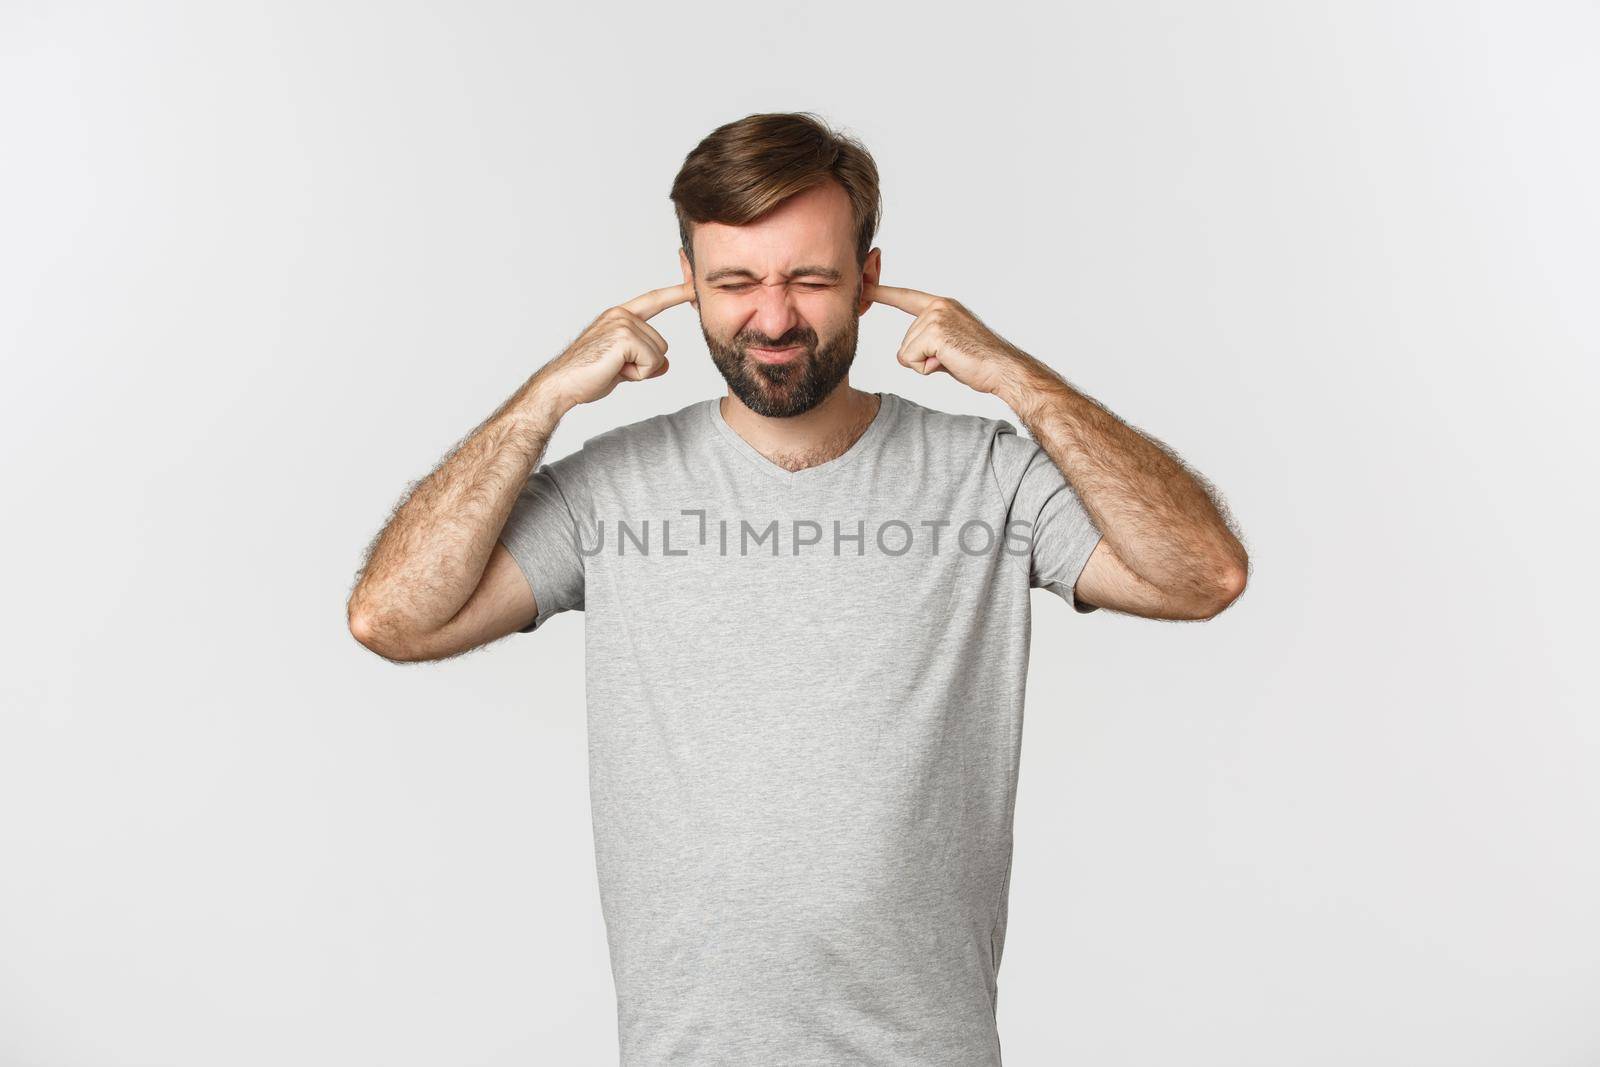 Portrait of annoyed guy in gray t-shirt, shutting ears and grimacing from loud noise, standing over white background.